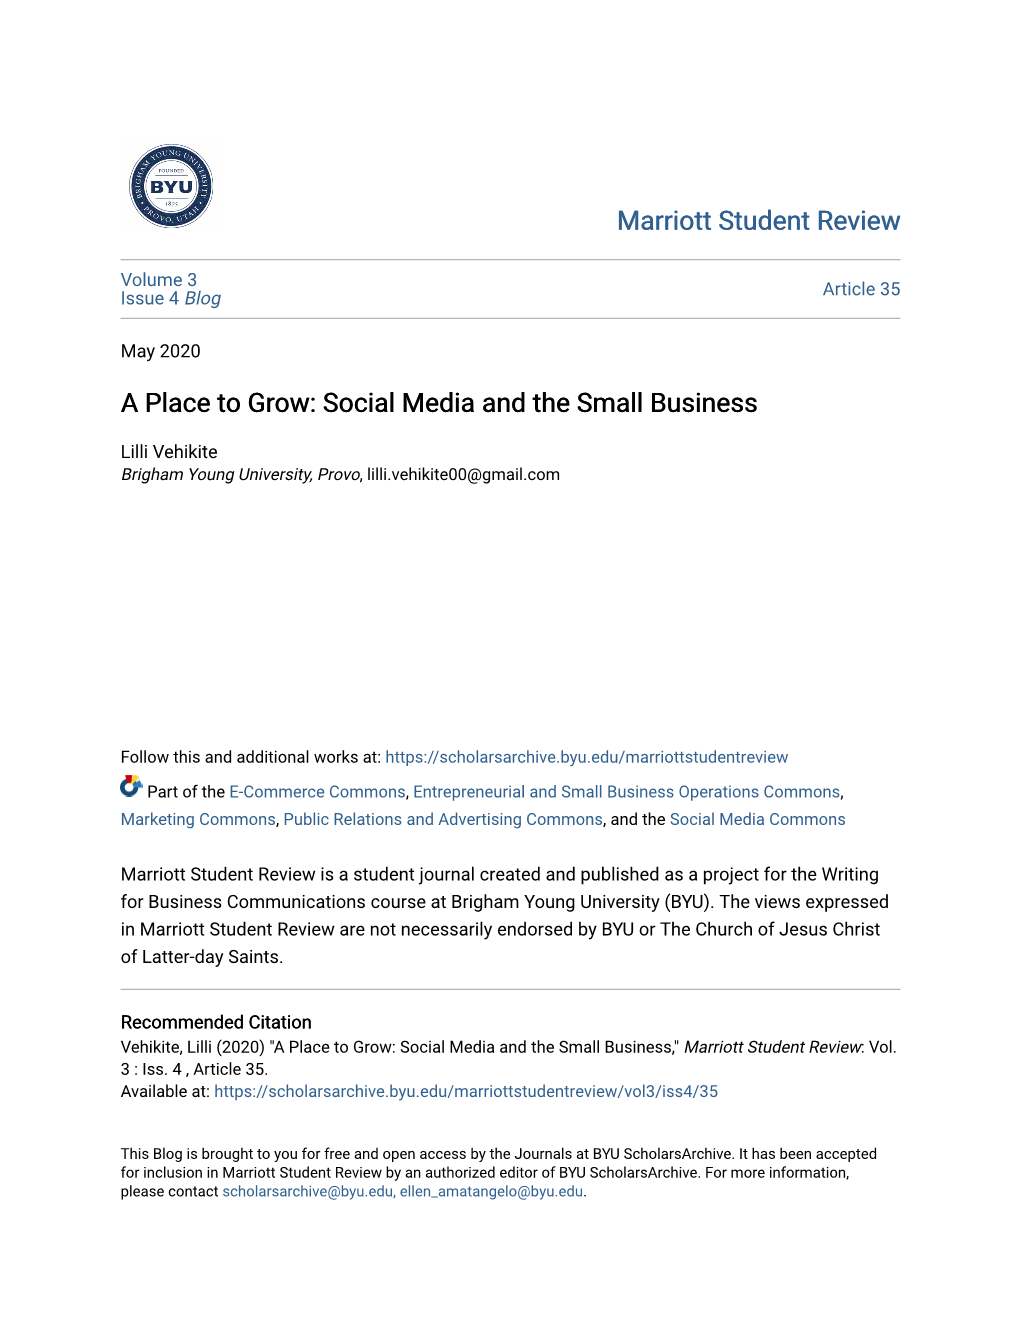 A Place to Grow: Social Media and the Small Business